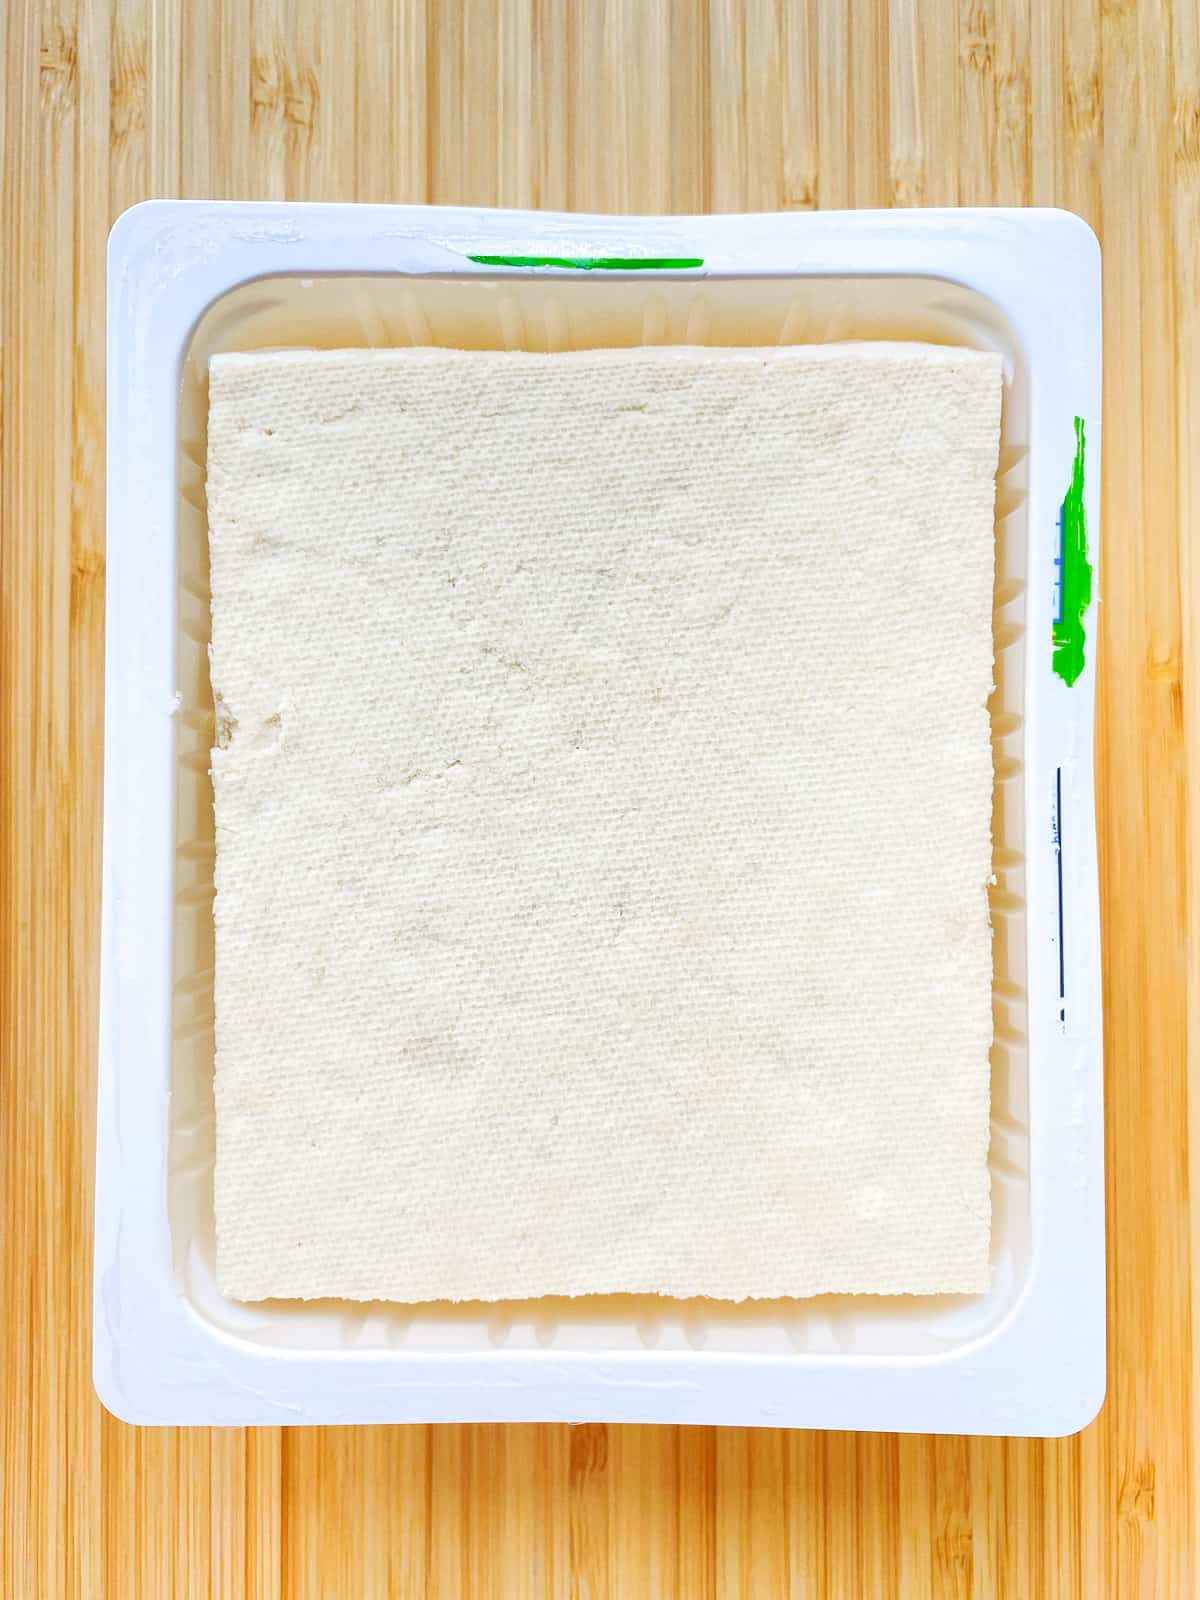 An image of tofu in its plastic packing tray.